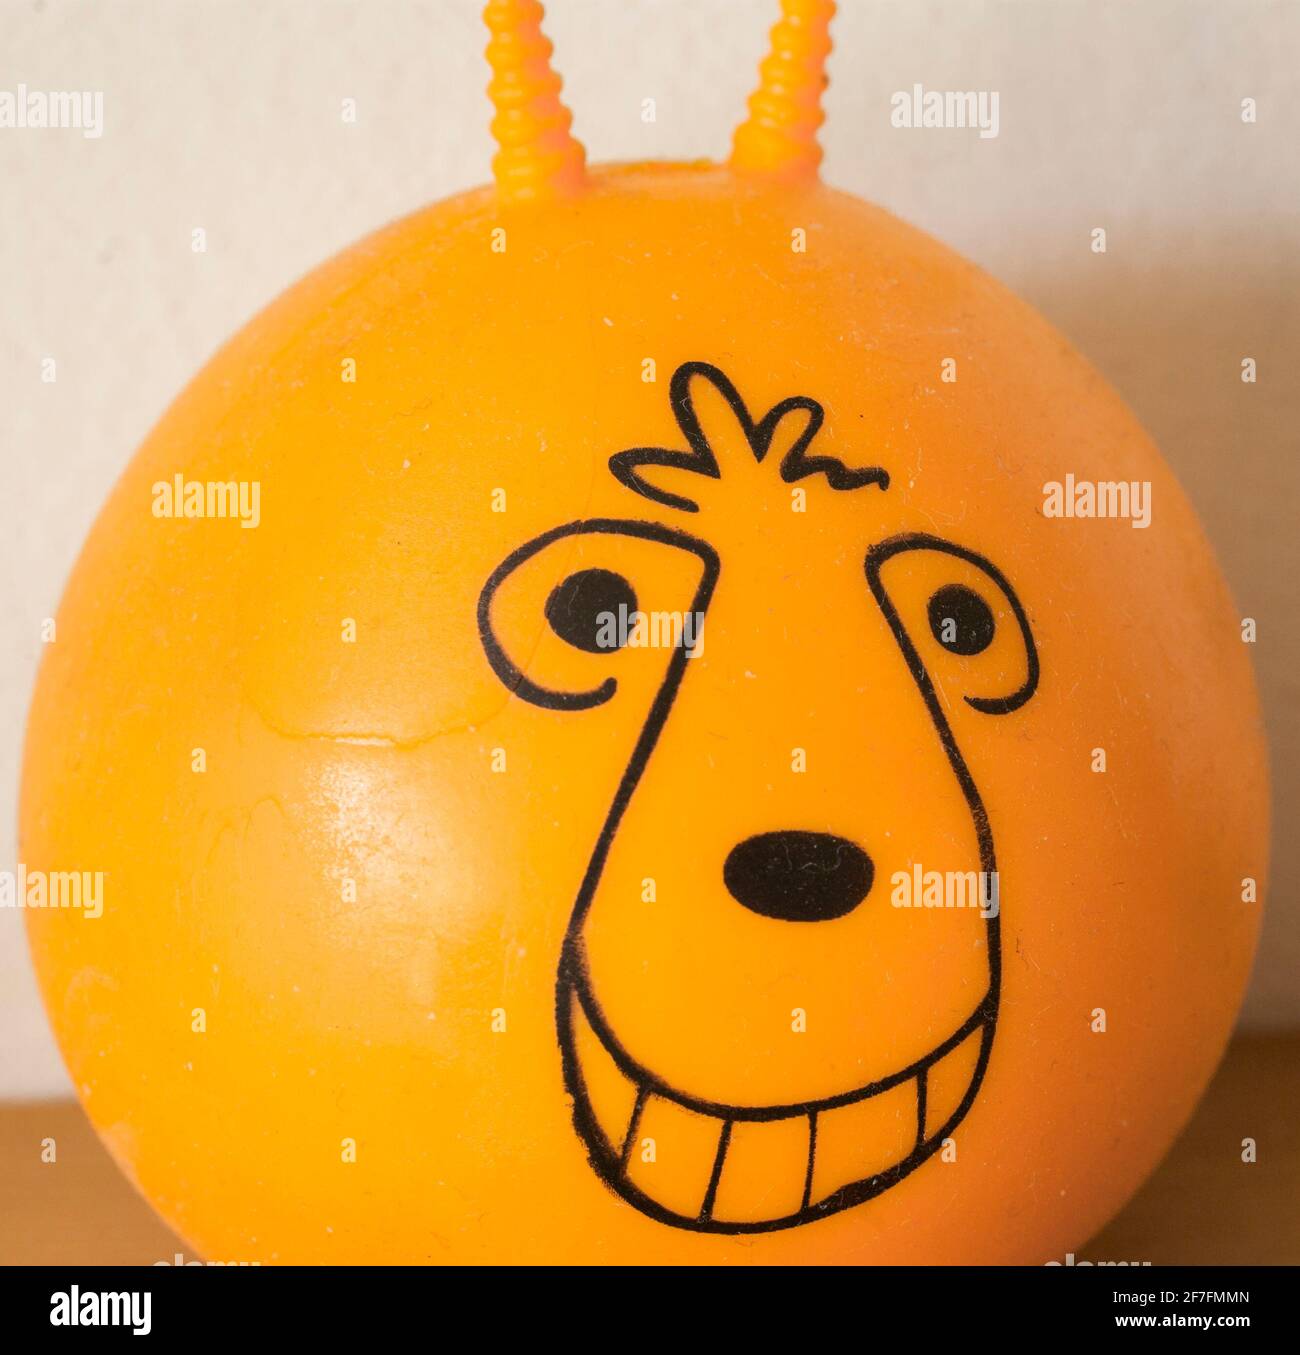 A close up of an orange stress ball in the form of a miniature space hopper. UK. Stock Photo